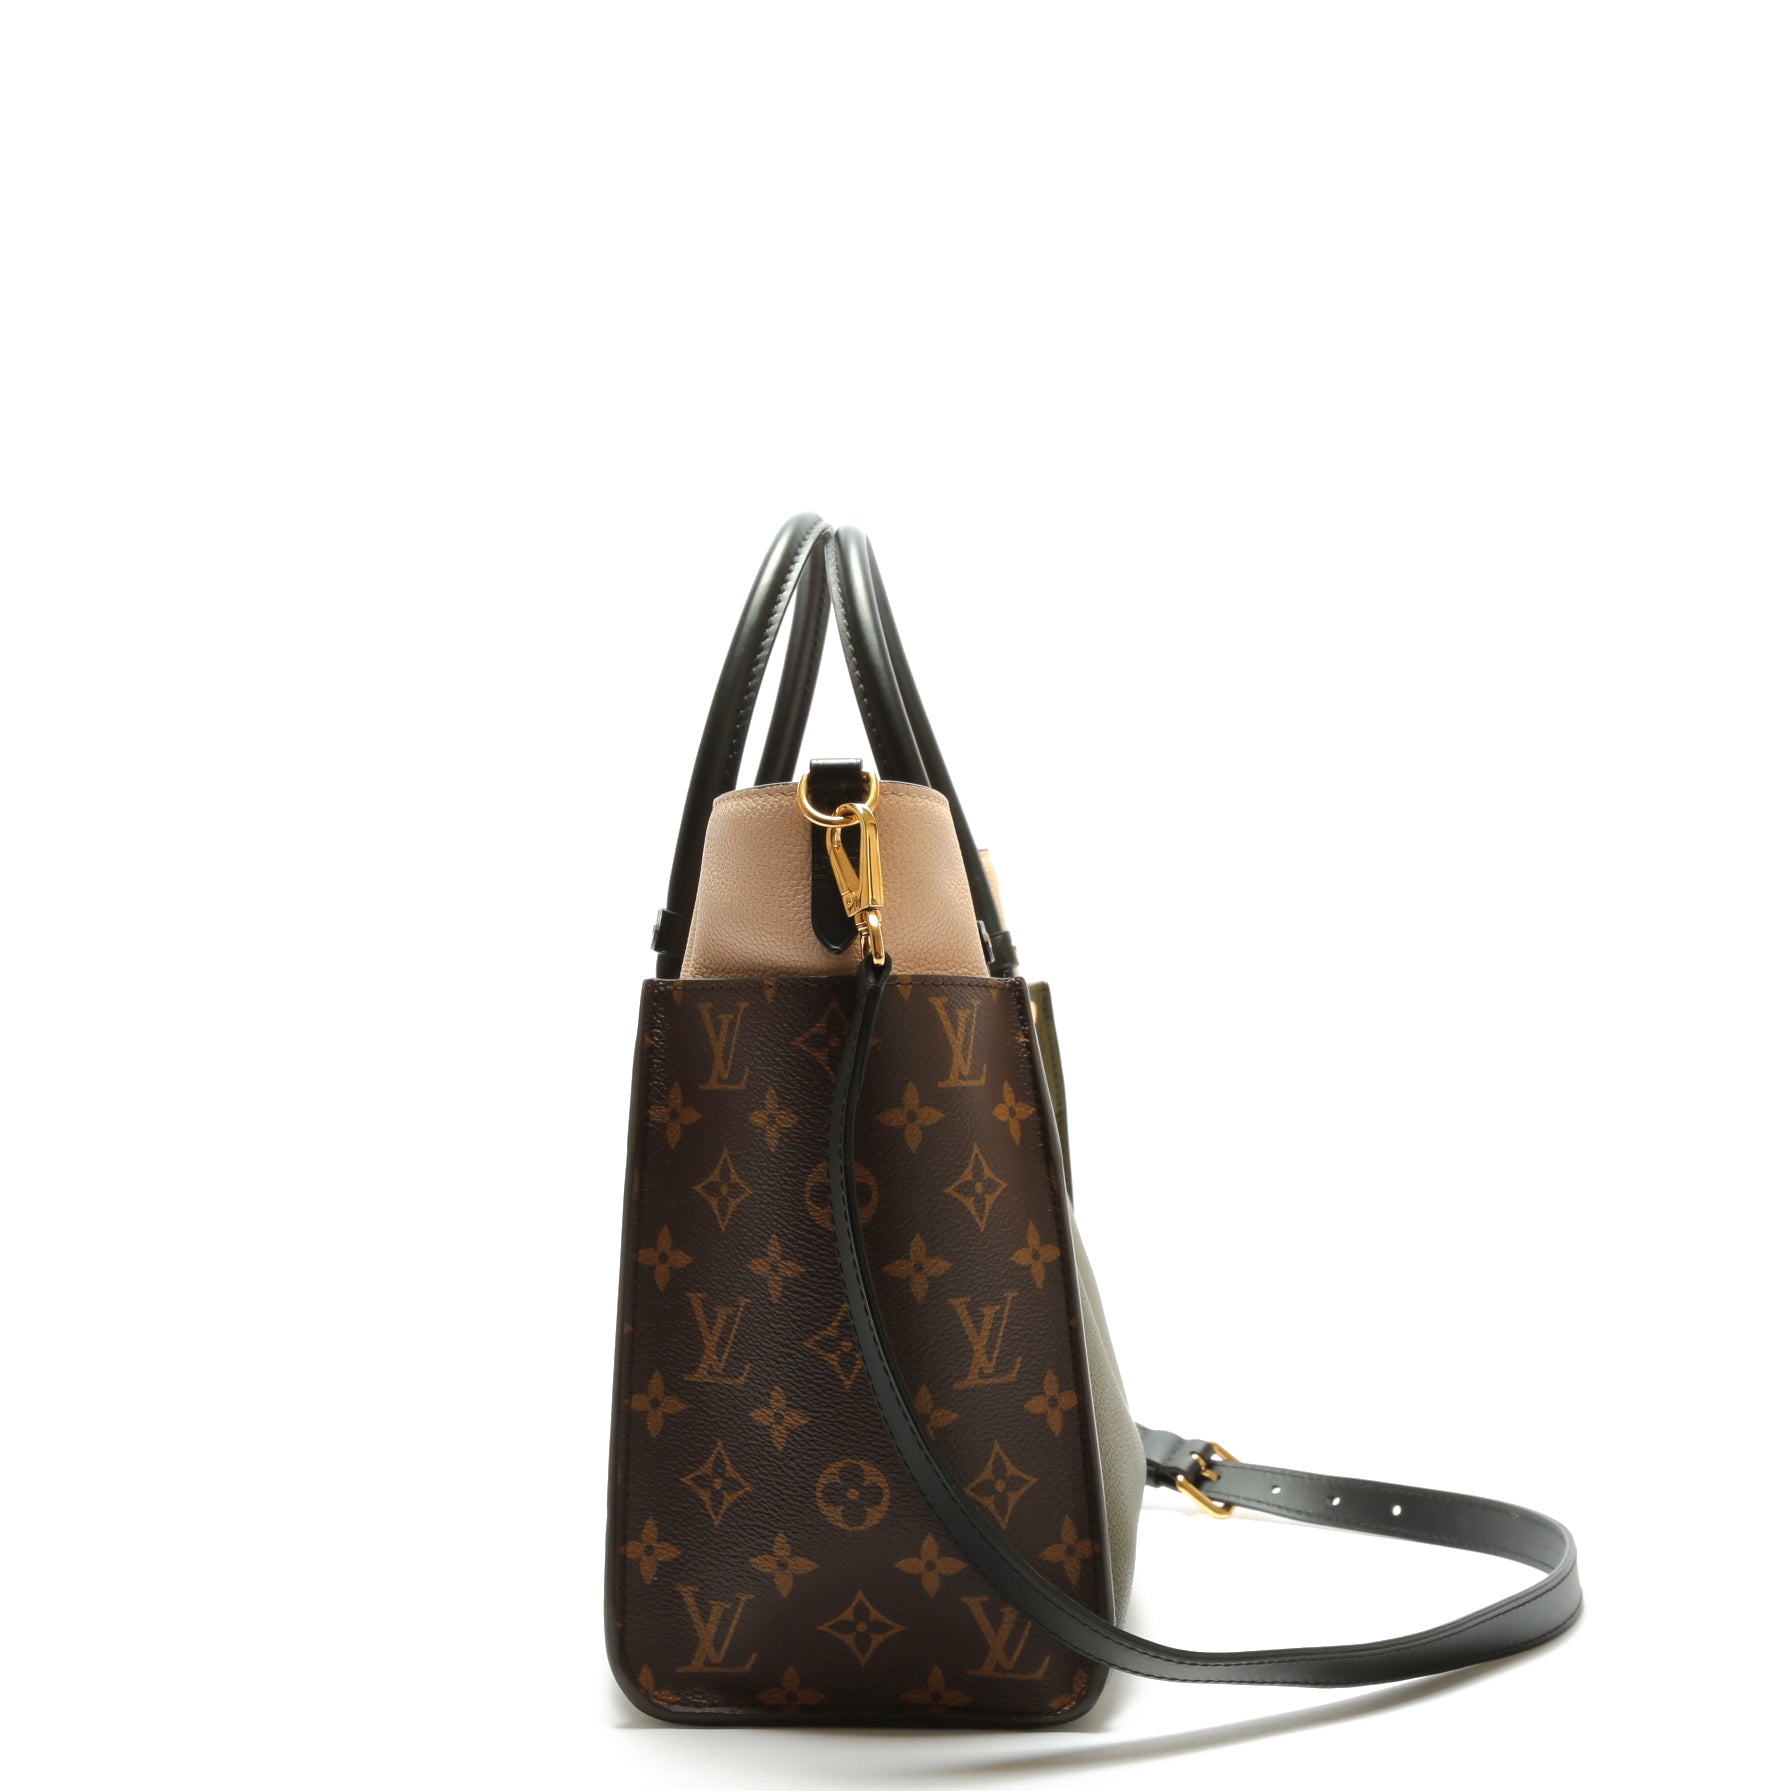 LOUIS VUITTON ON MY SIDE MONOGRAM MM TOTE